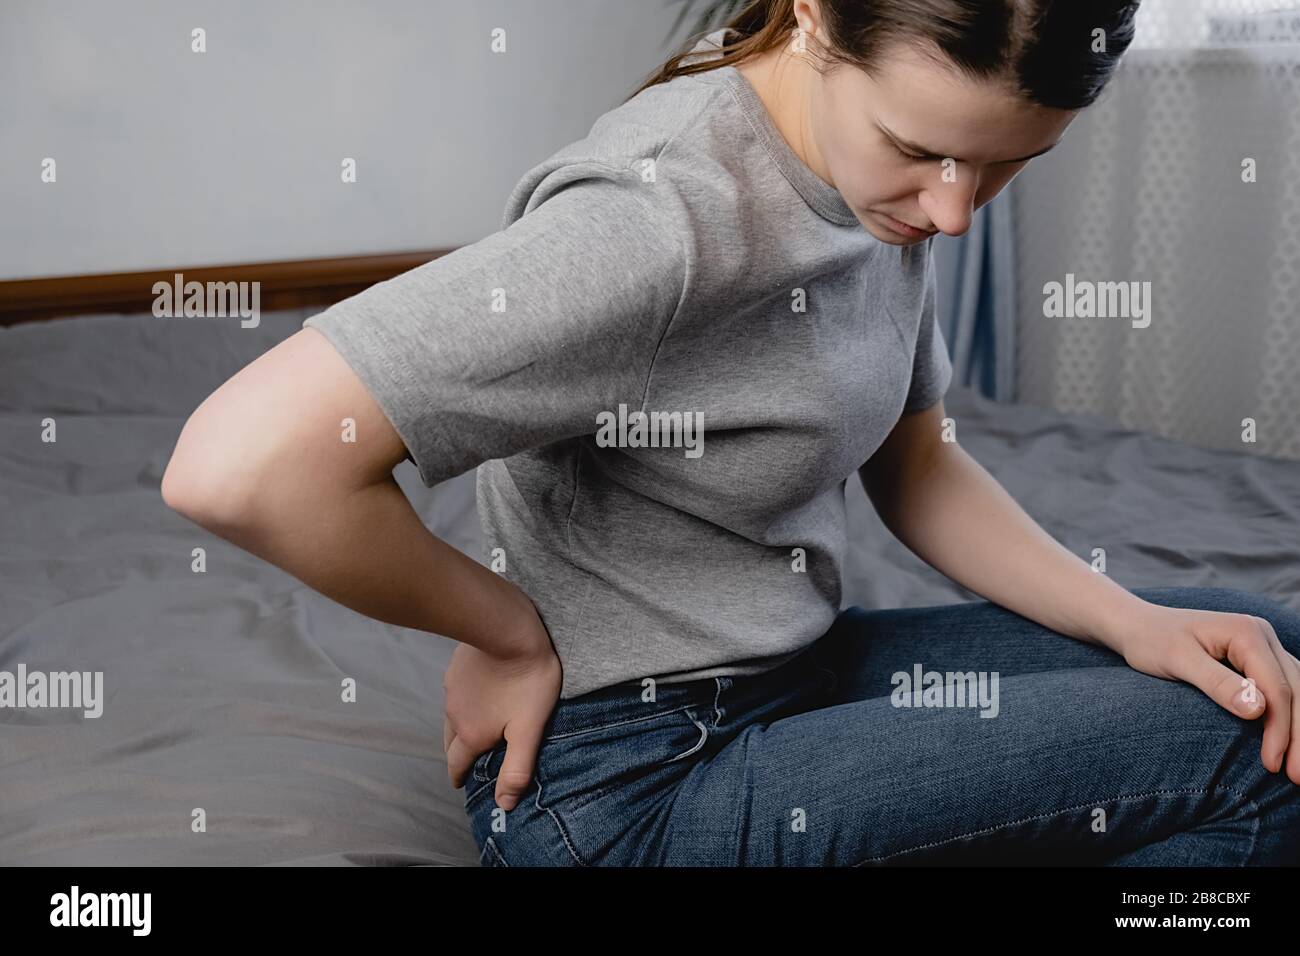 Upset young woman suffering from backache after sleep, rubbing stiff muscles, unhappy girl sitting on bed at room, feeling discomfort, because of bad Stock Photo